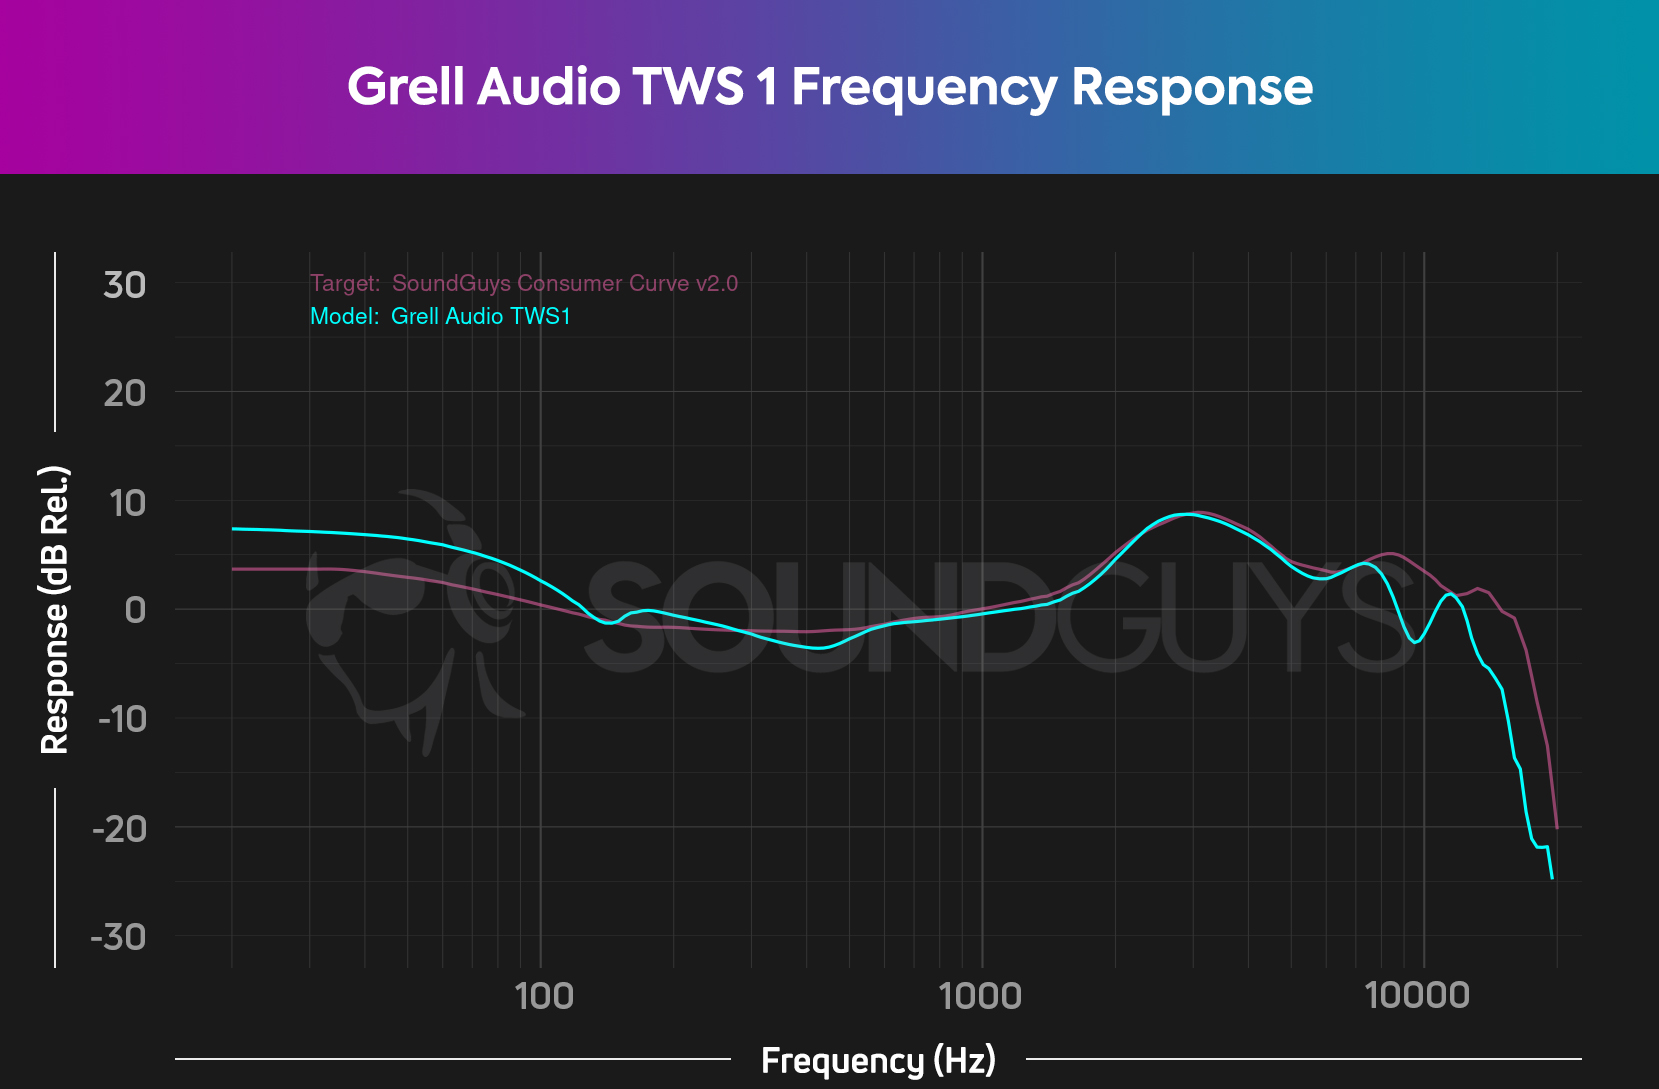 Grell Audio TWS 1 frequency response chart